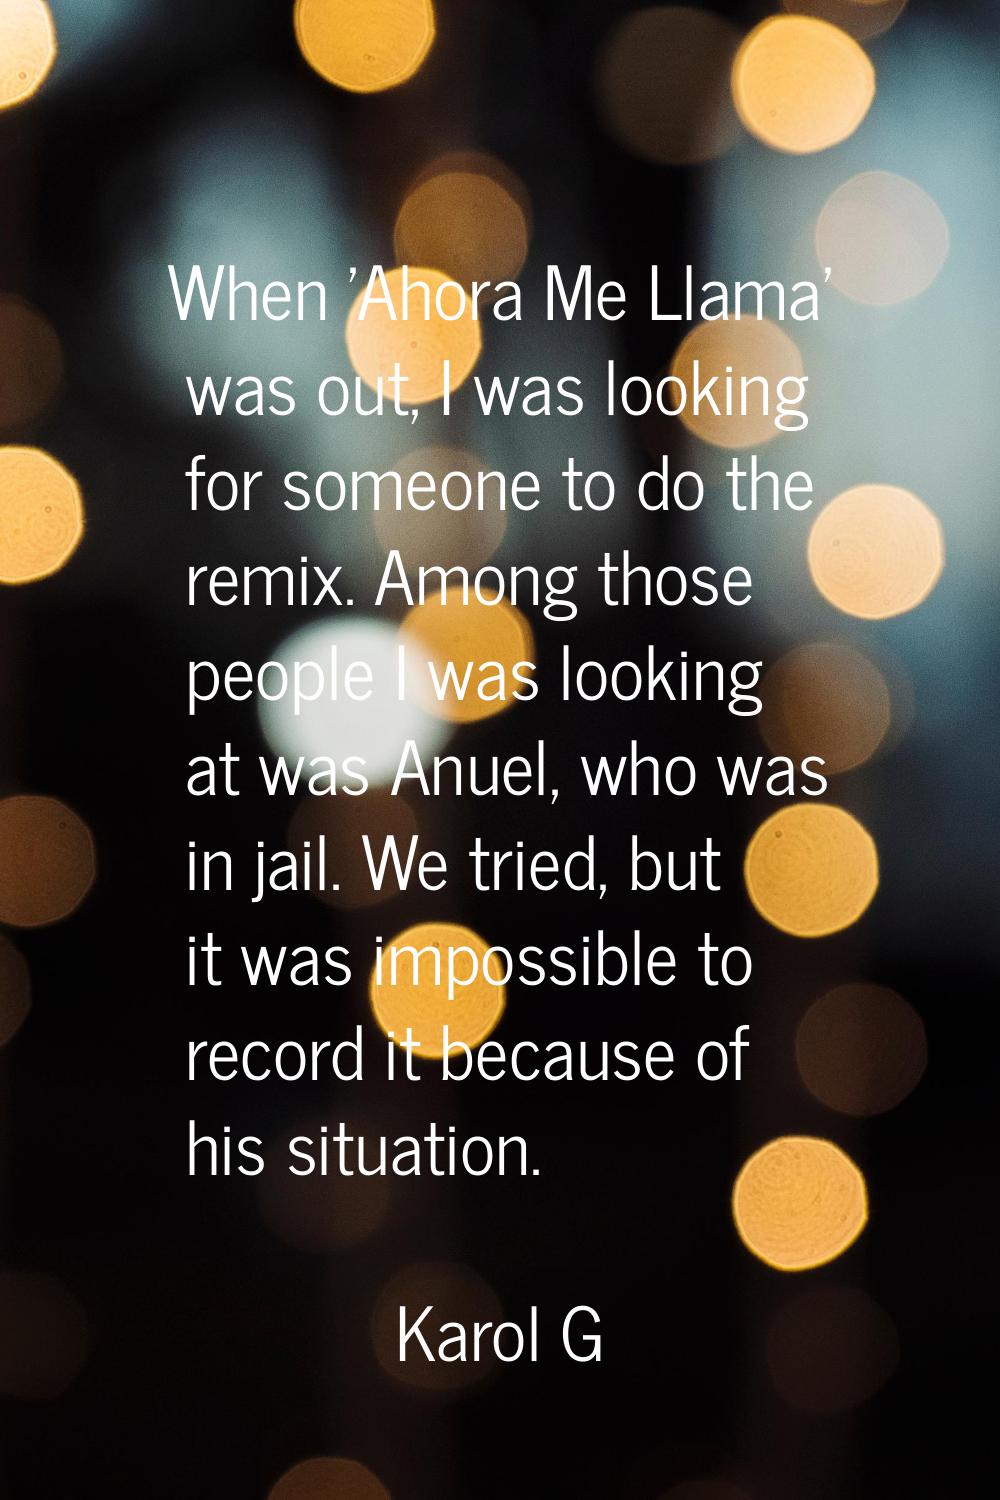 When 'Ahora Me Llama' was out, I was looking for someone to do the remix. Among those people I was 